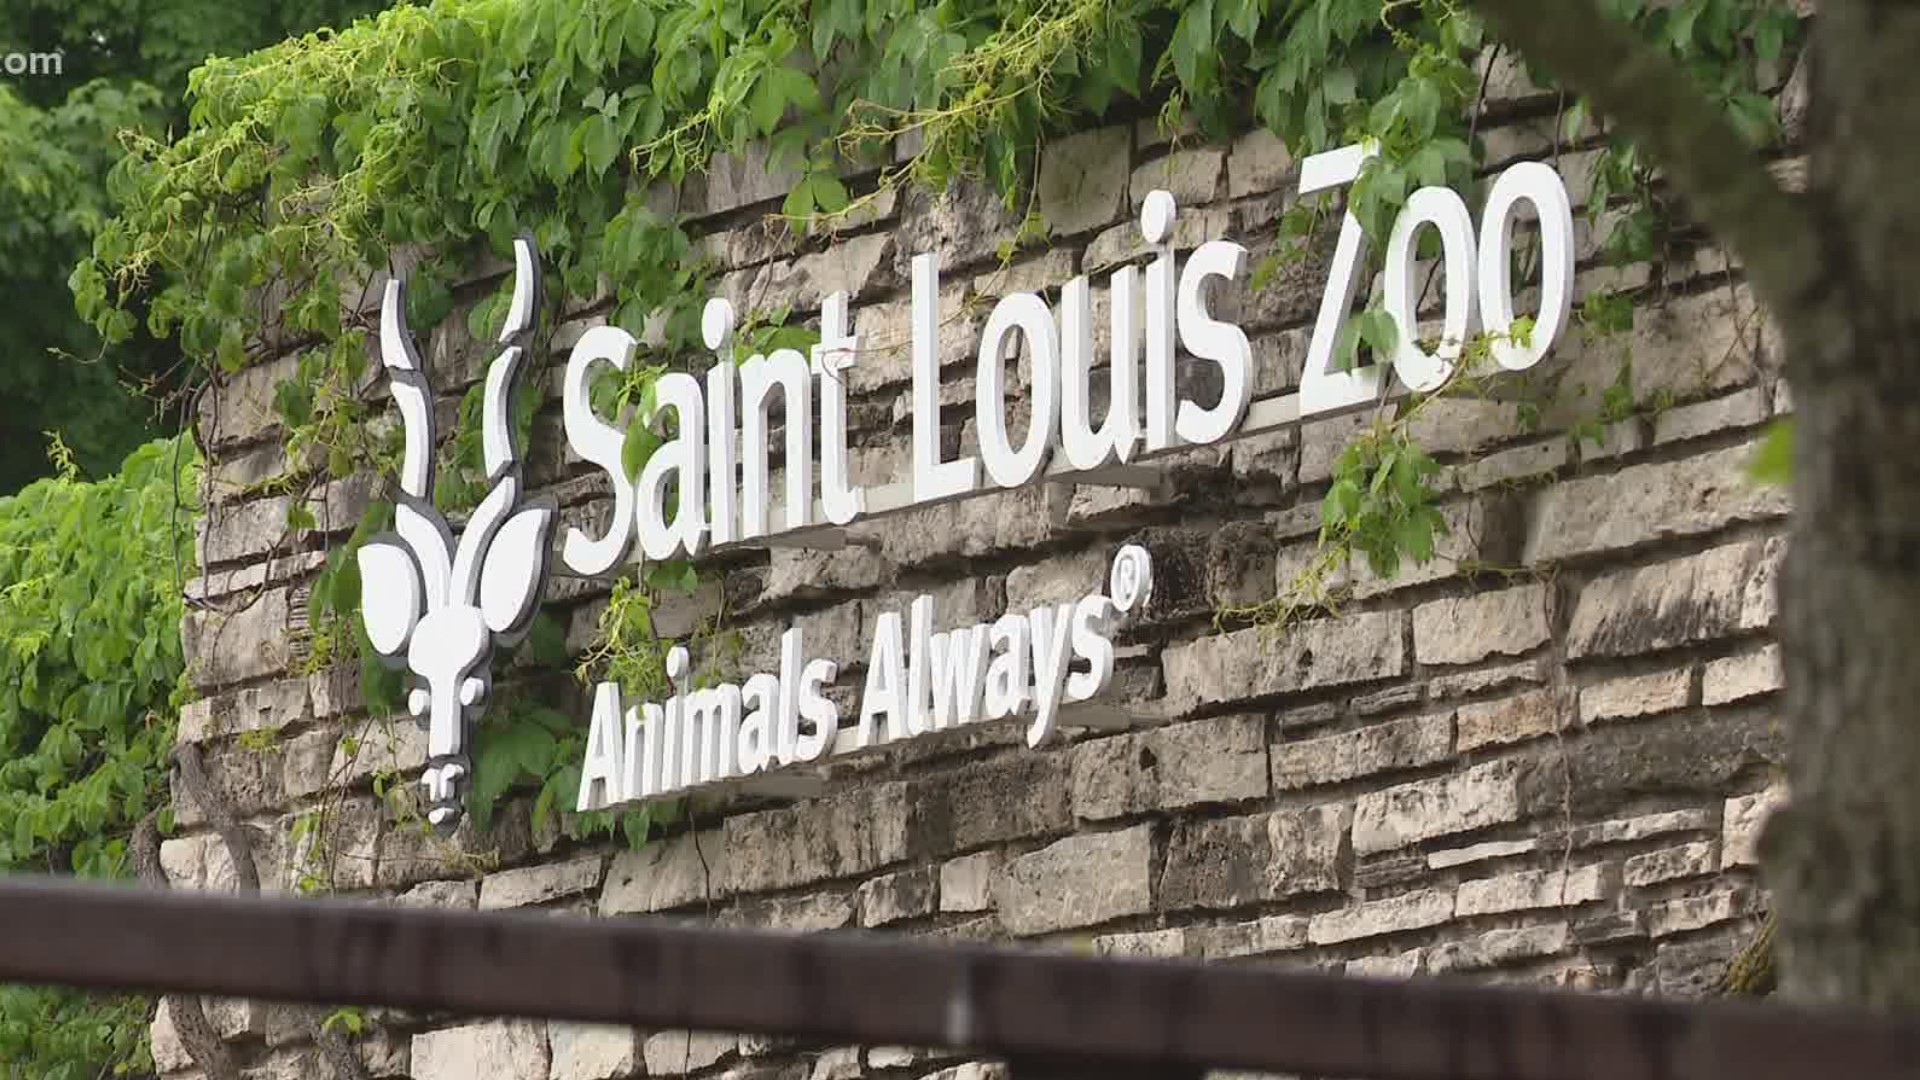 "We want our guests to be safe, we want our guests to be safe and we want our animals to be safe."